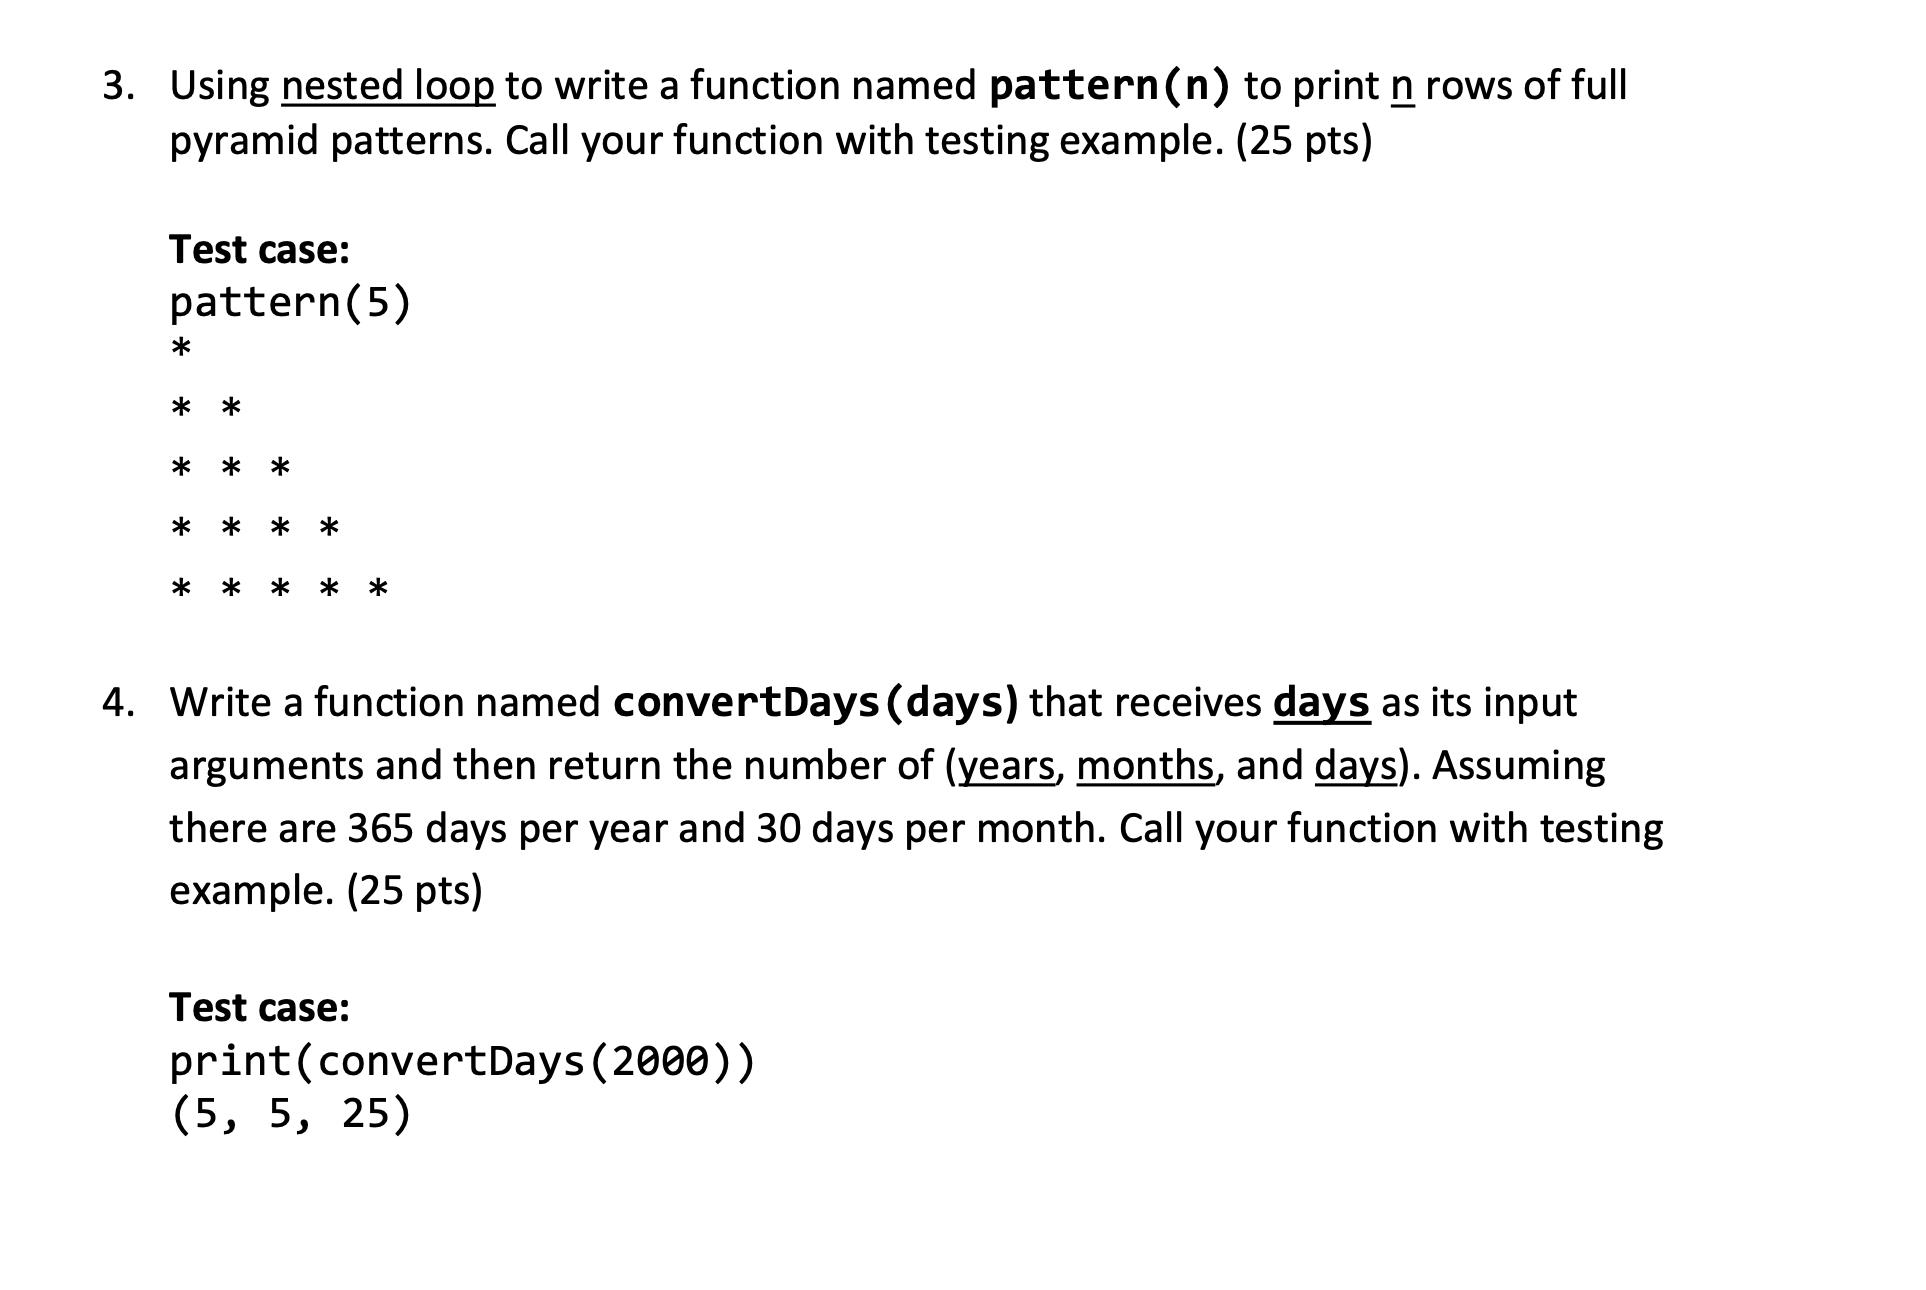 3. Using nested loop to write a function named pattern (n) to print n rows of full pyramid patterns. Call